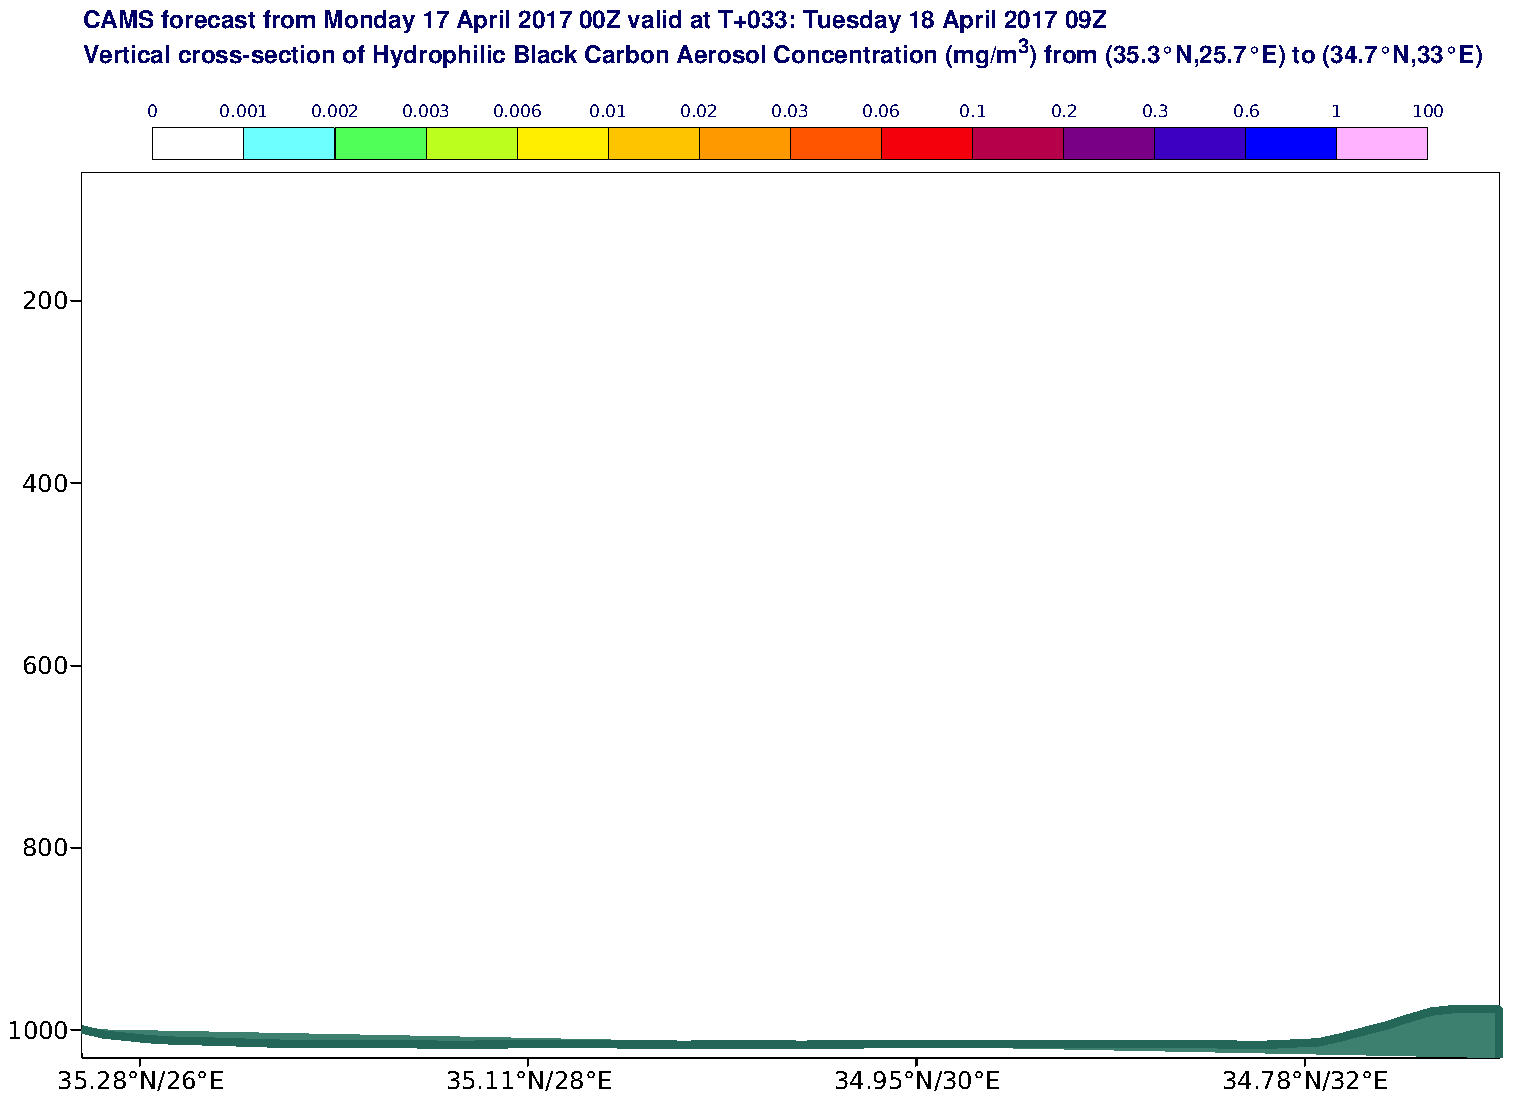 Vertical cross-section of Hydrophilic Black Carbon Aerosol Concentration (mg/m3) valid at T33 - 2017-04-18 09:00